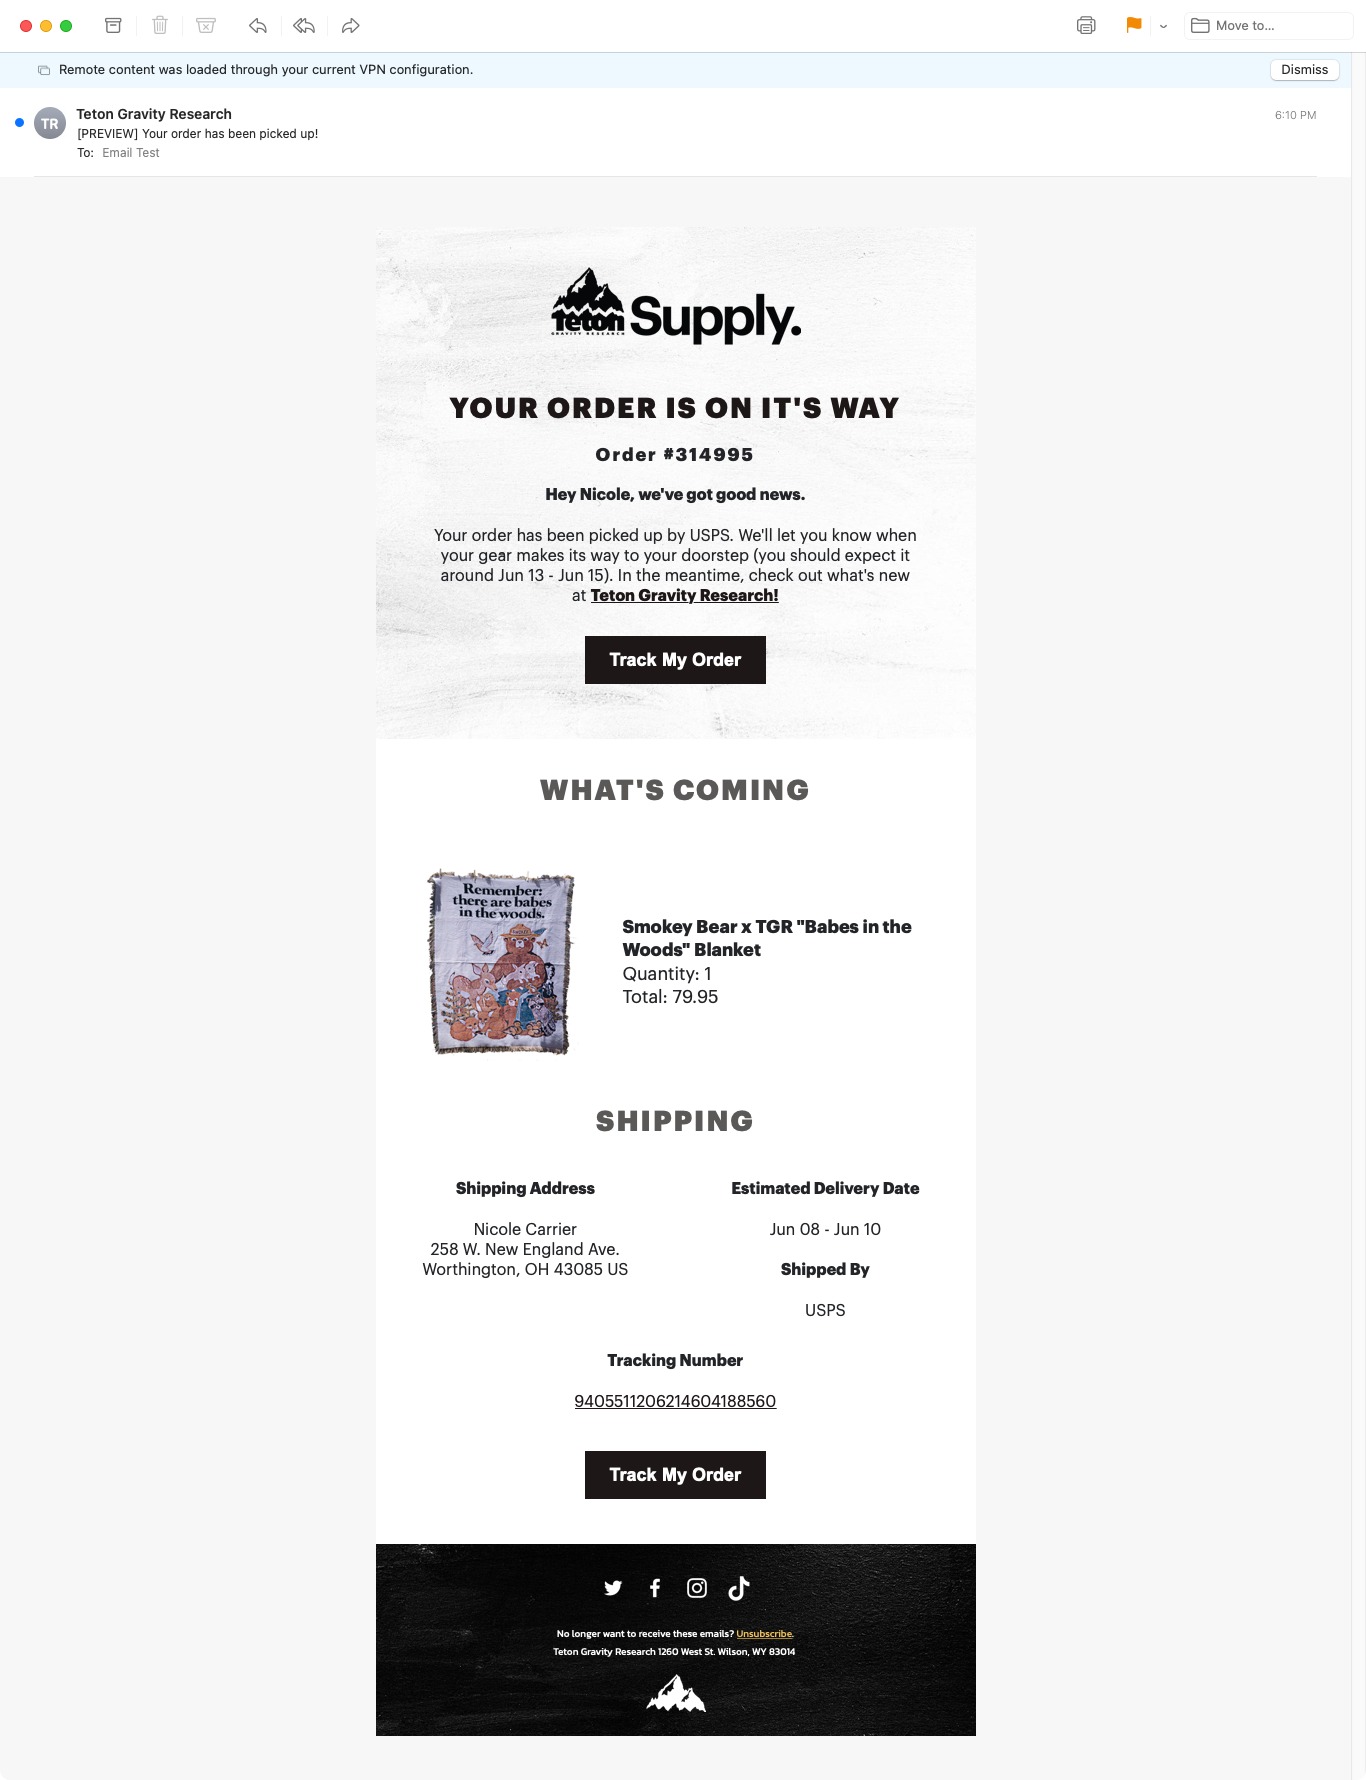 Teton Gravity Research Shipment Created Industry Email Template screenshot